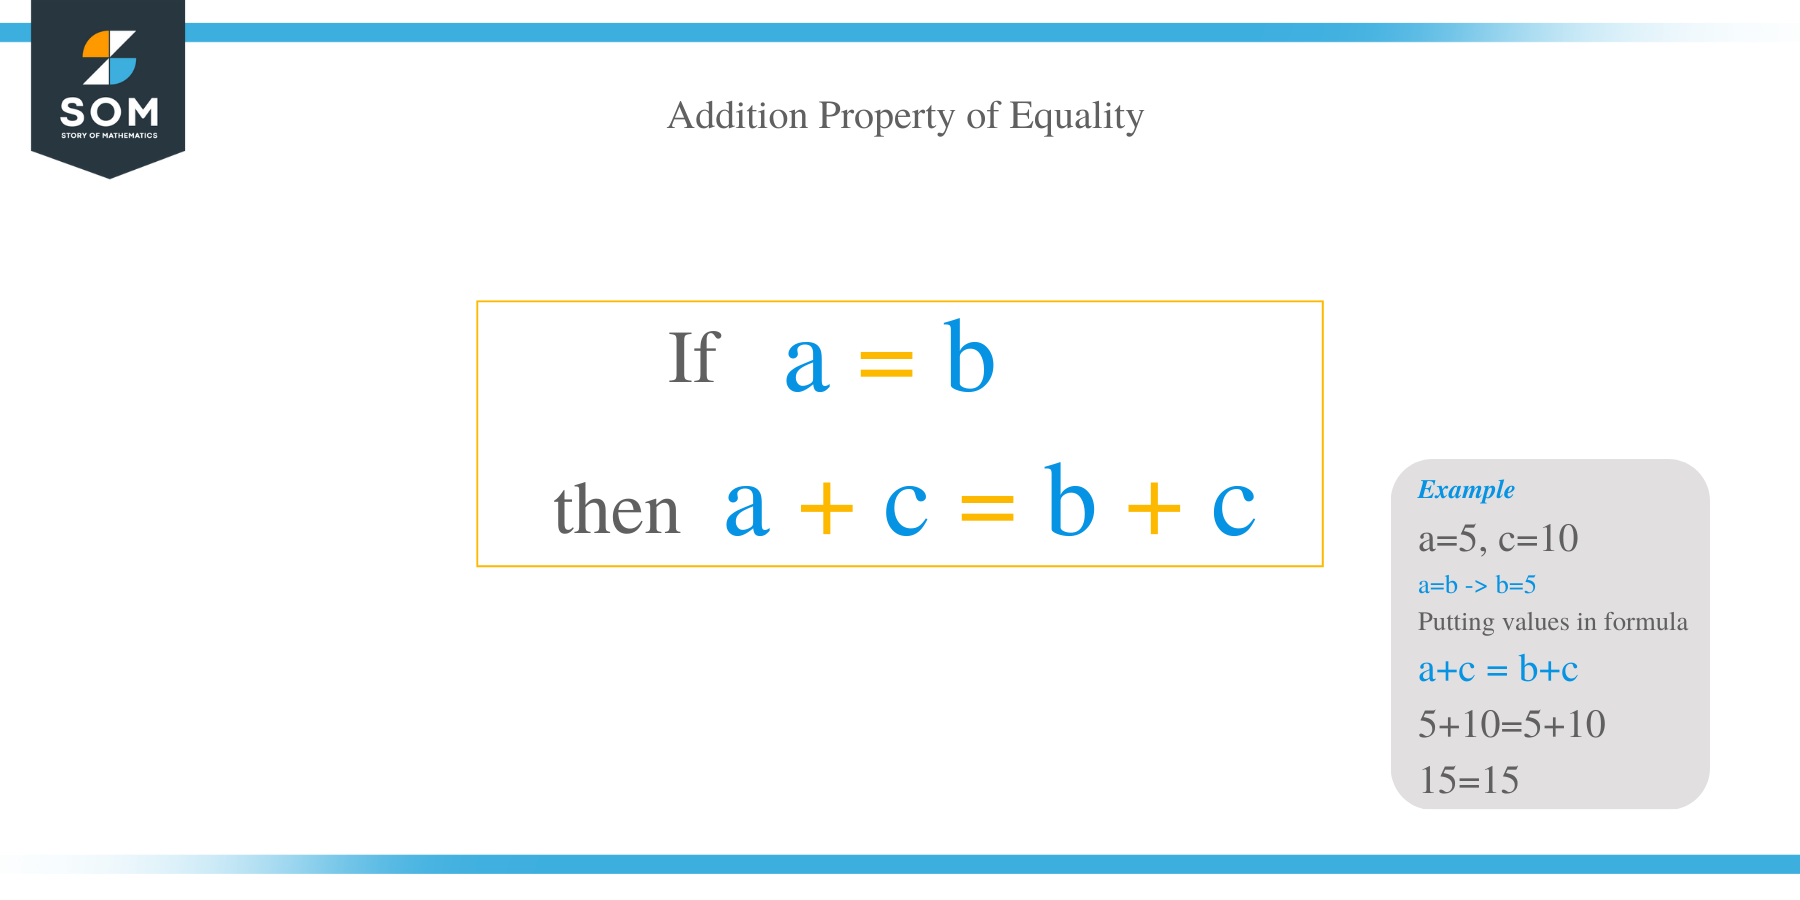 What Is the Addition Property of Equality?